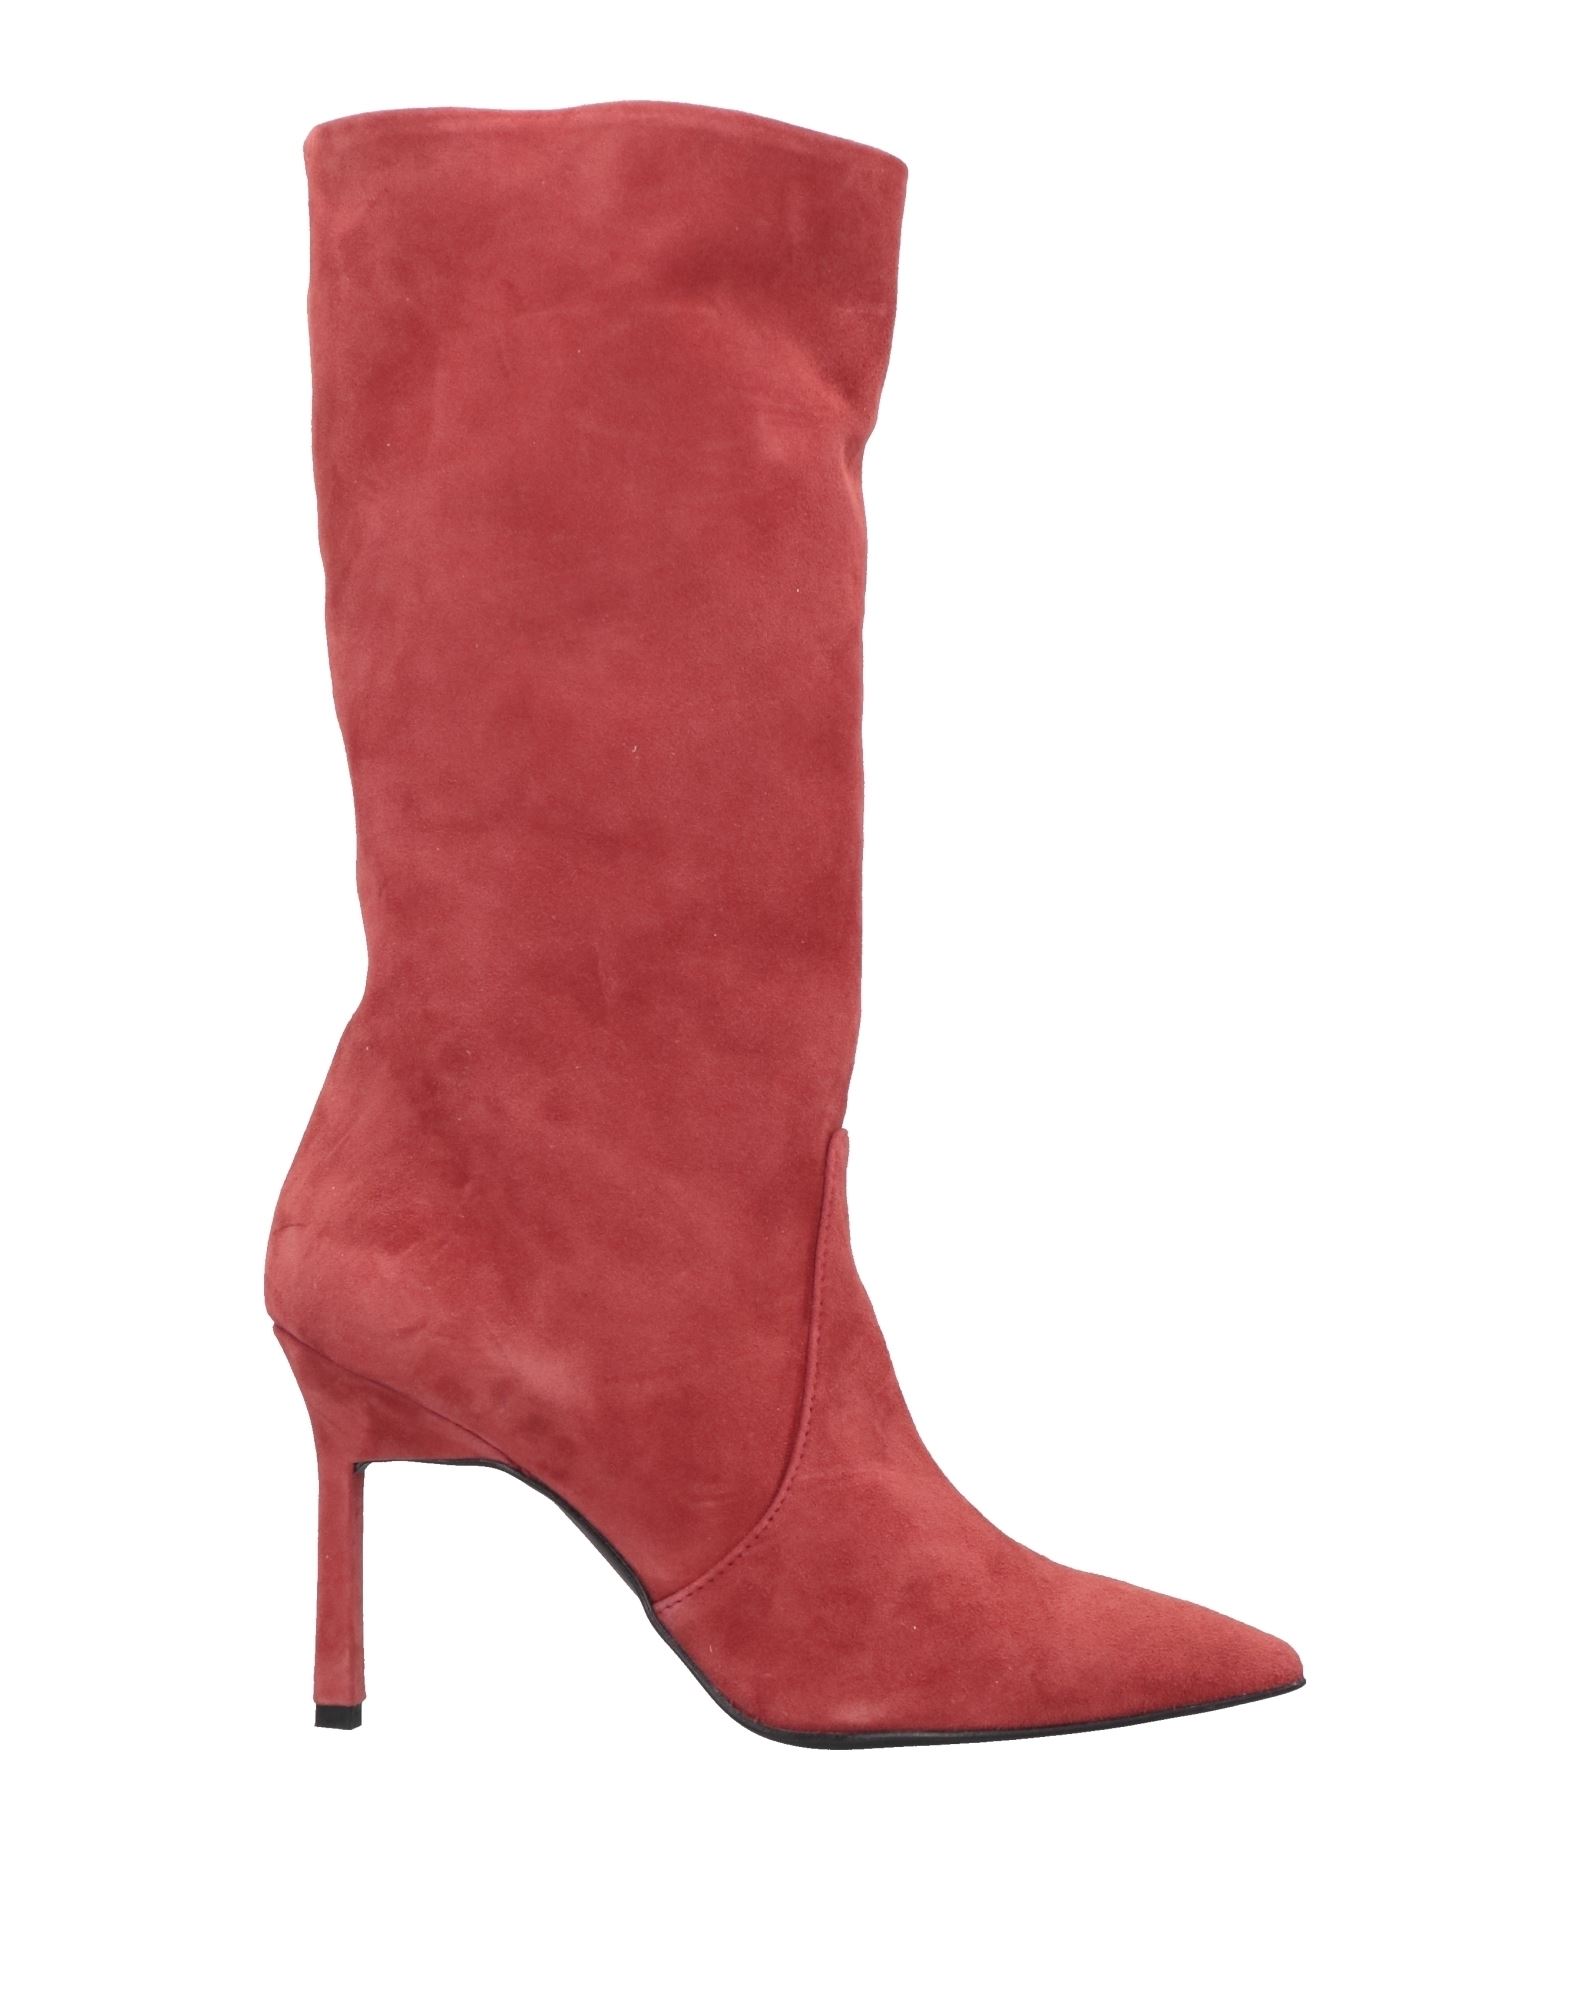 Islo Isabella Lorusso Knee Boots In Red